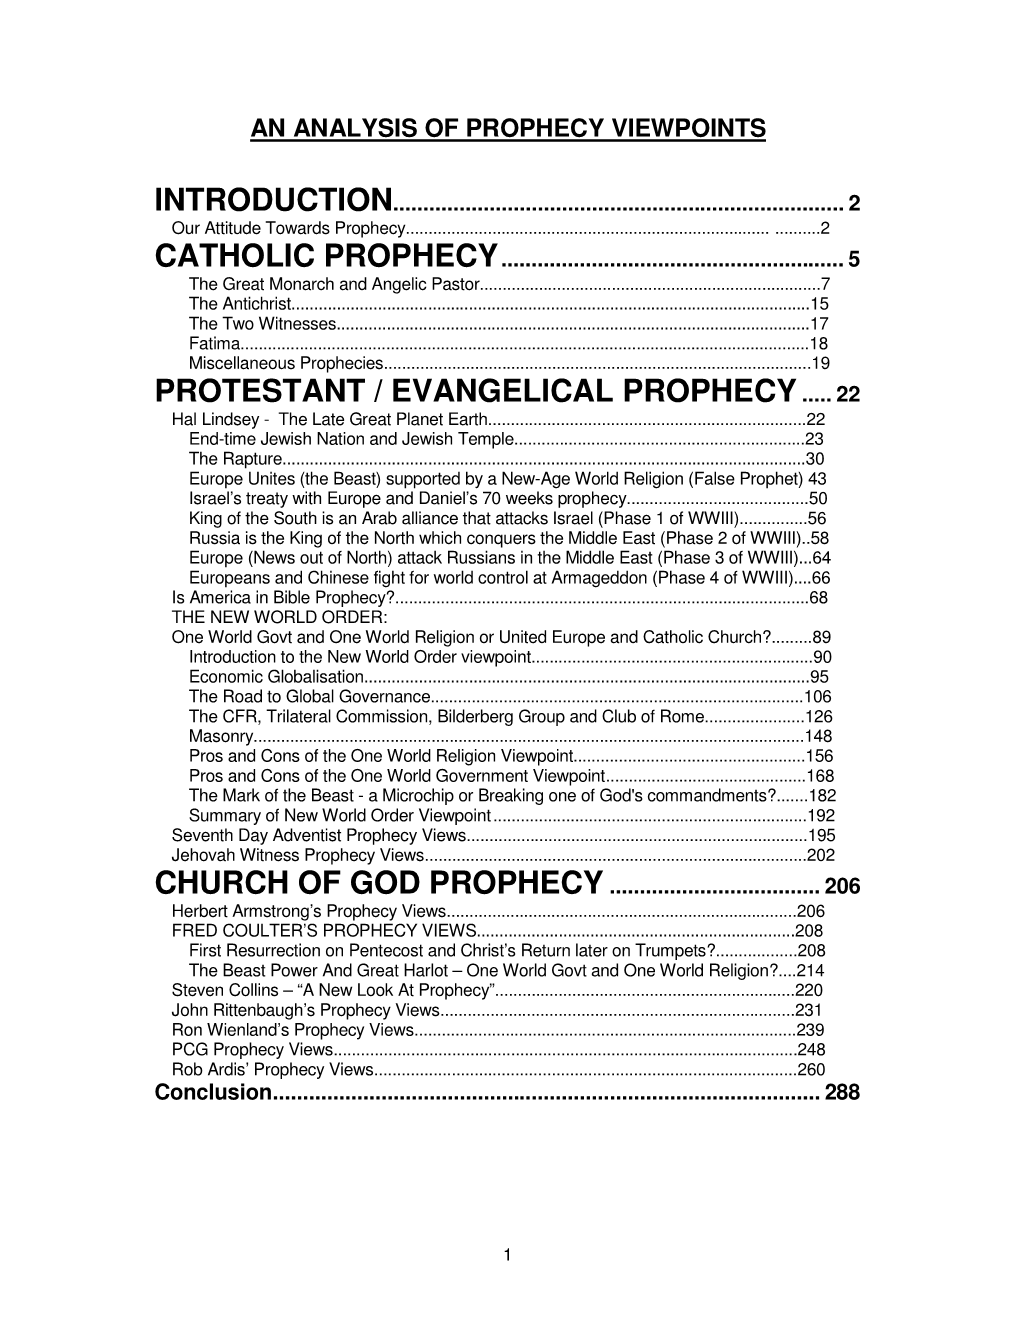 Protestant / Evangelical Prophecy...22